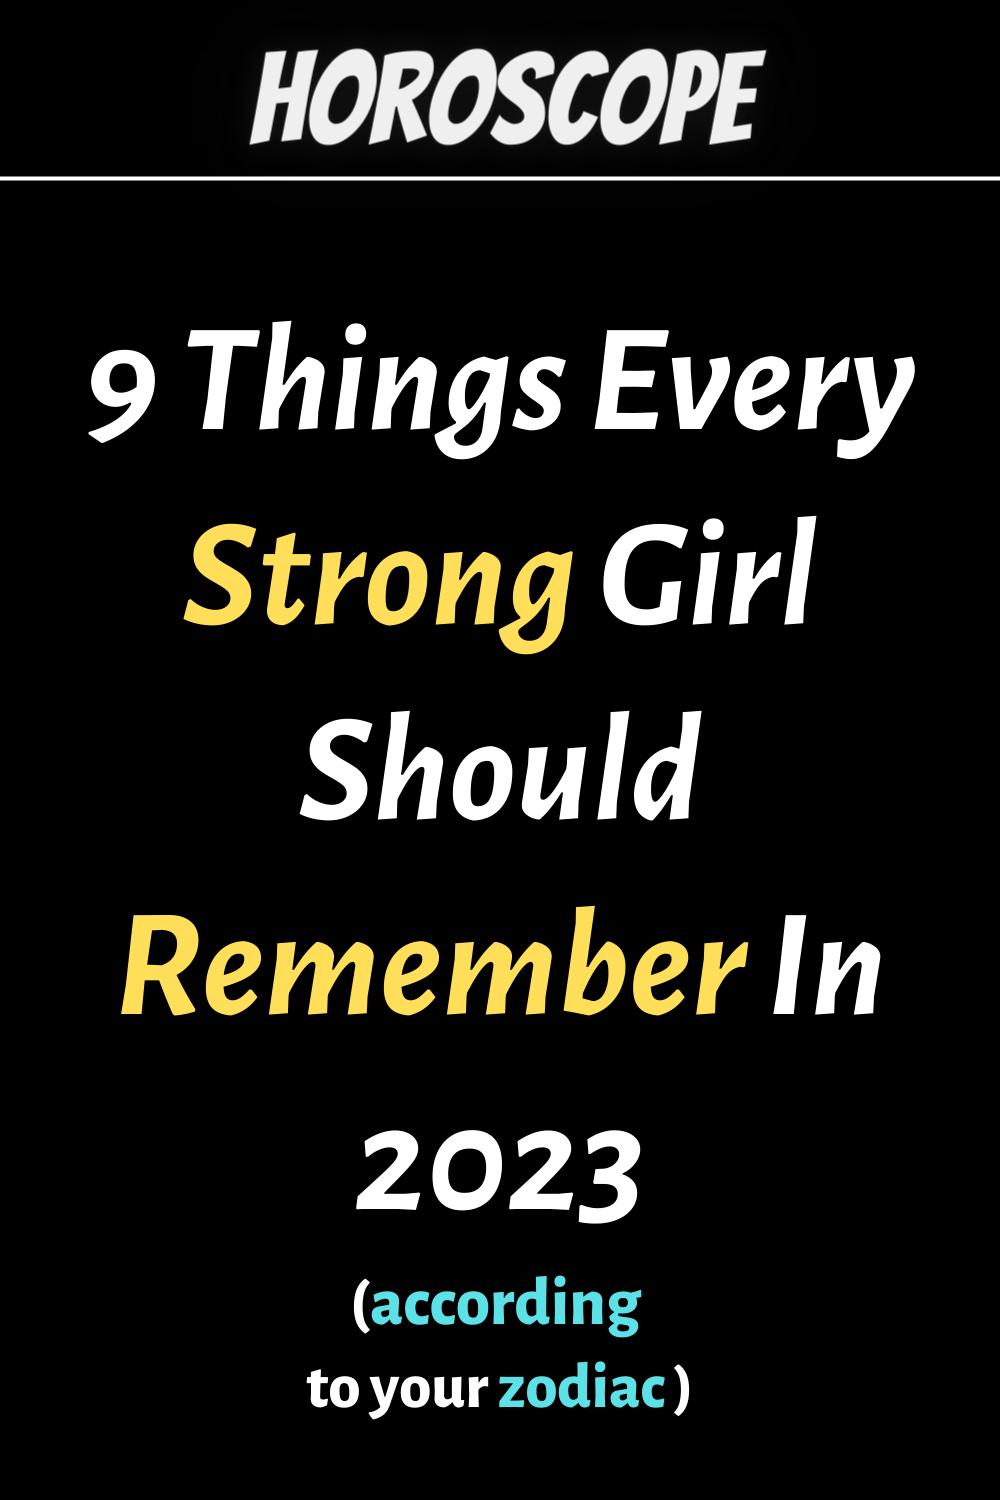 9 Things Every Strong Girl Should Remember In 2023